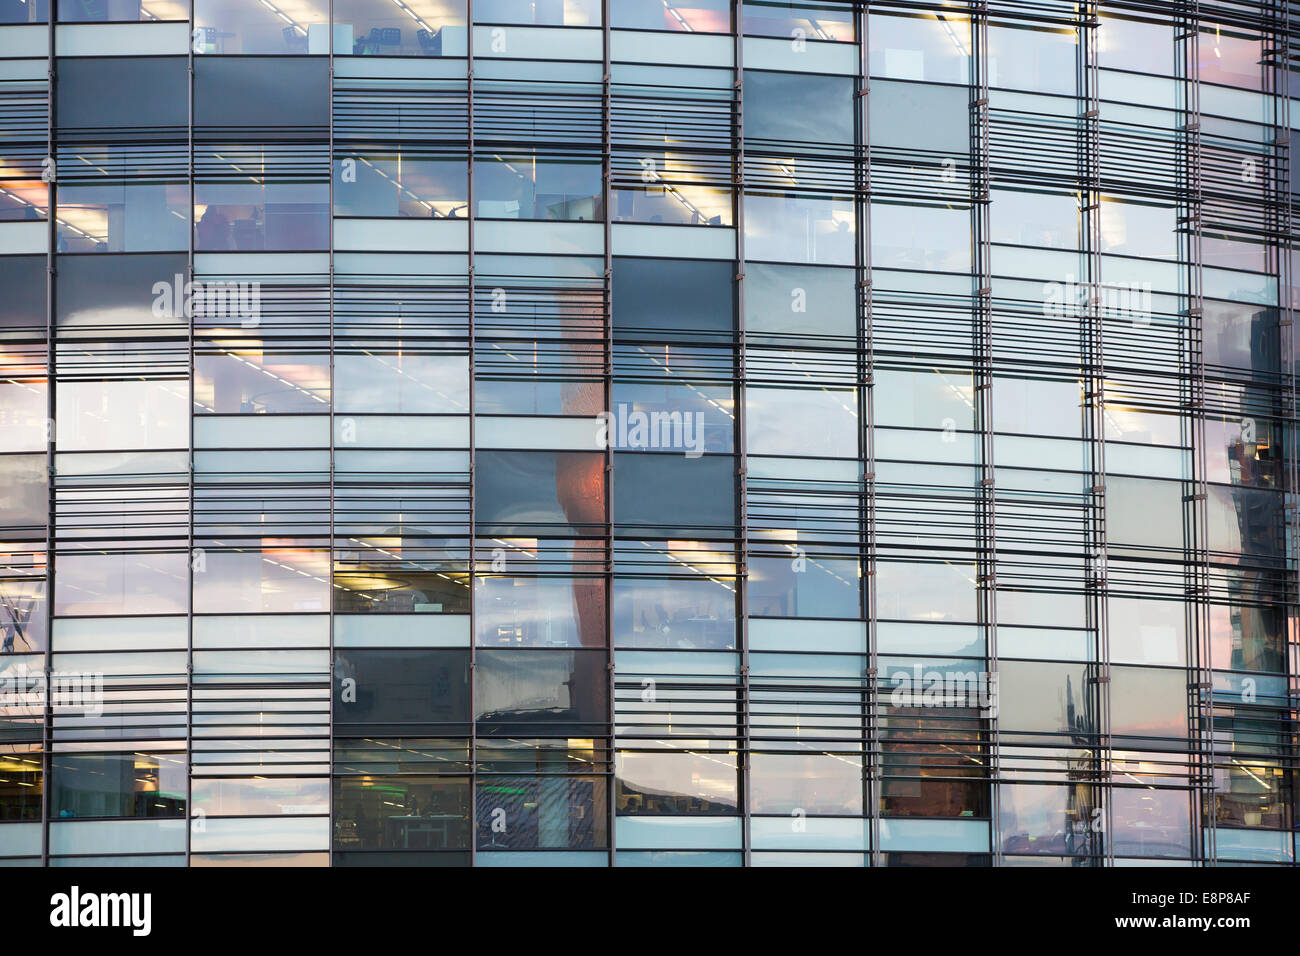 Windows at the offices of the BBC in Salford Quays, Manchester, reflect the setting sun at sunset. Stock Photo